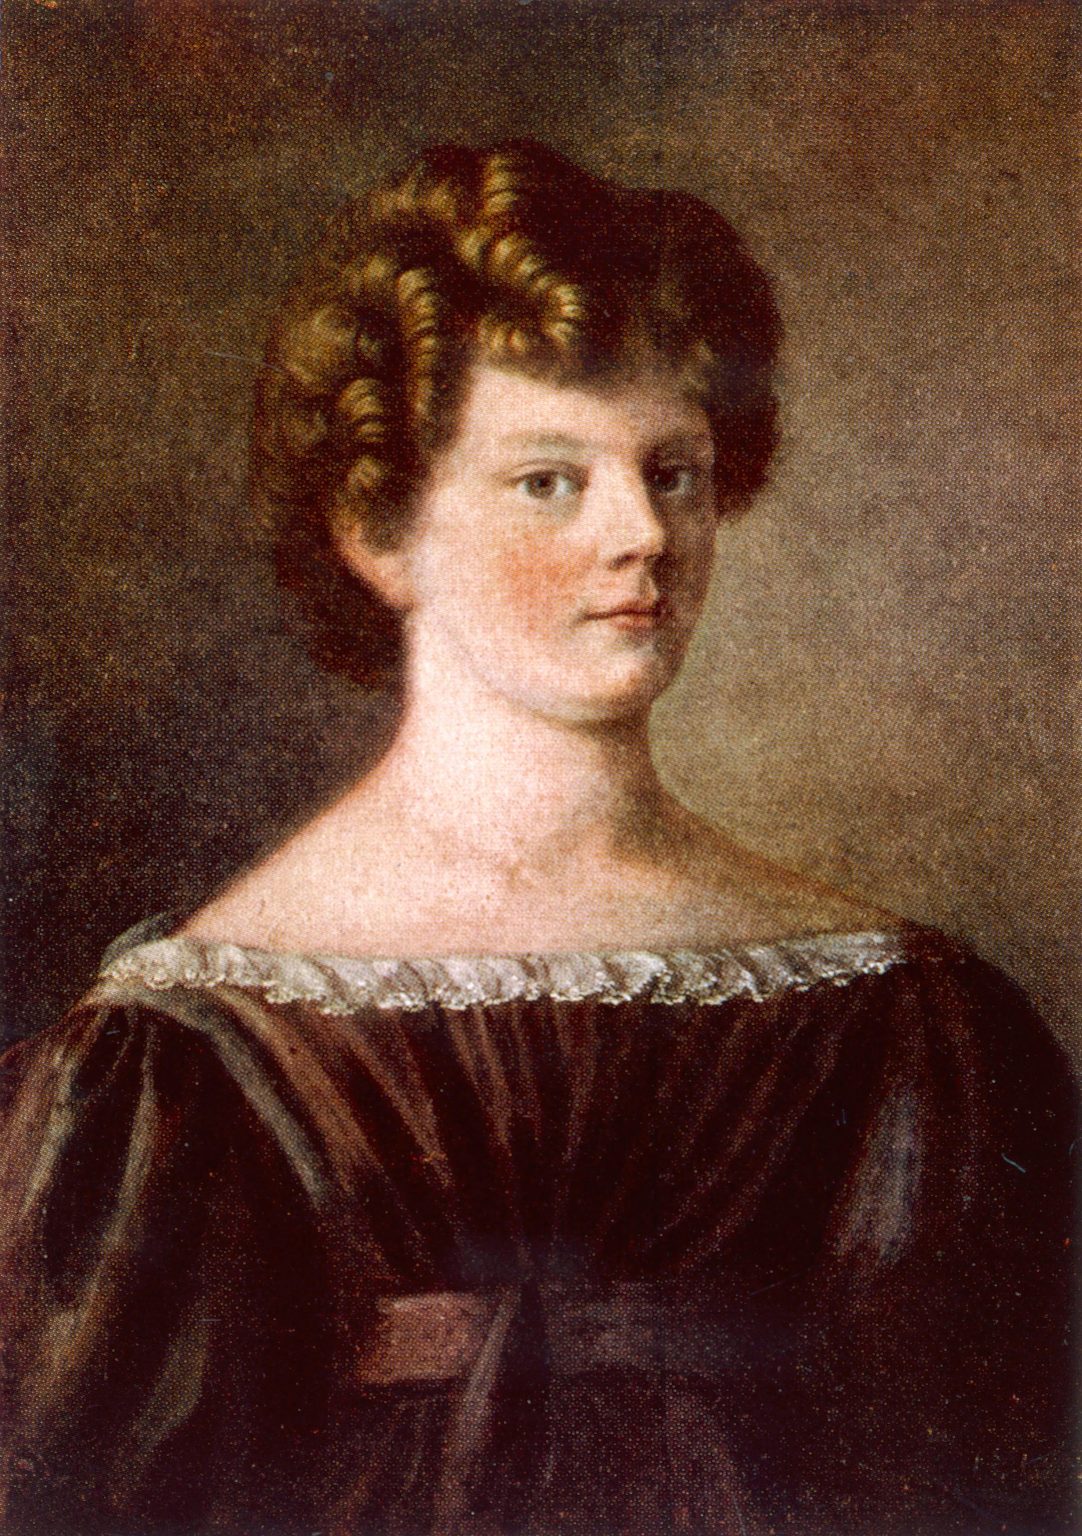 Portrait of Anna Sewell, author of Black Beauty (Alamy Images).